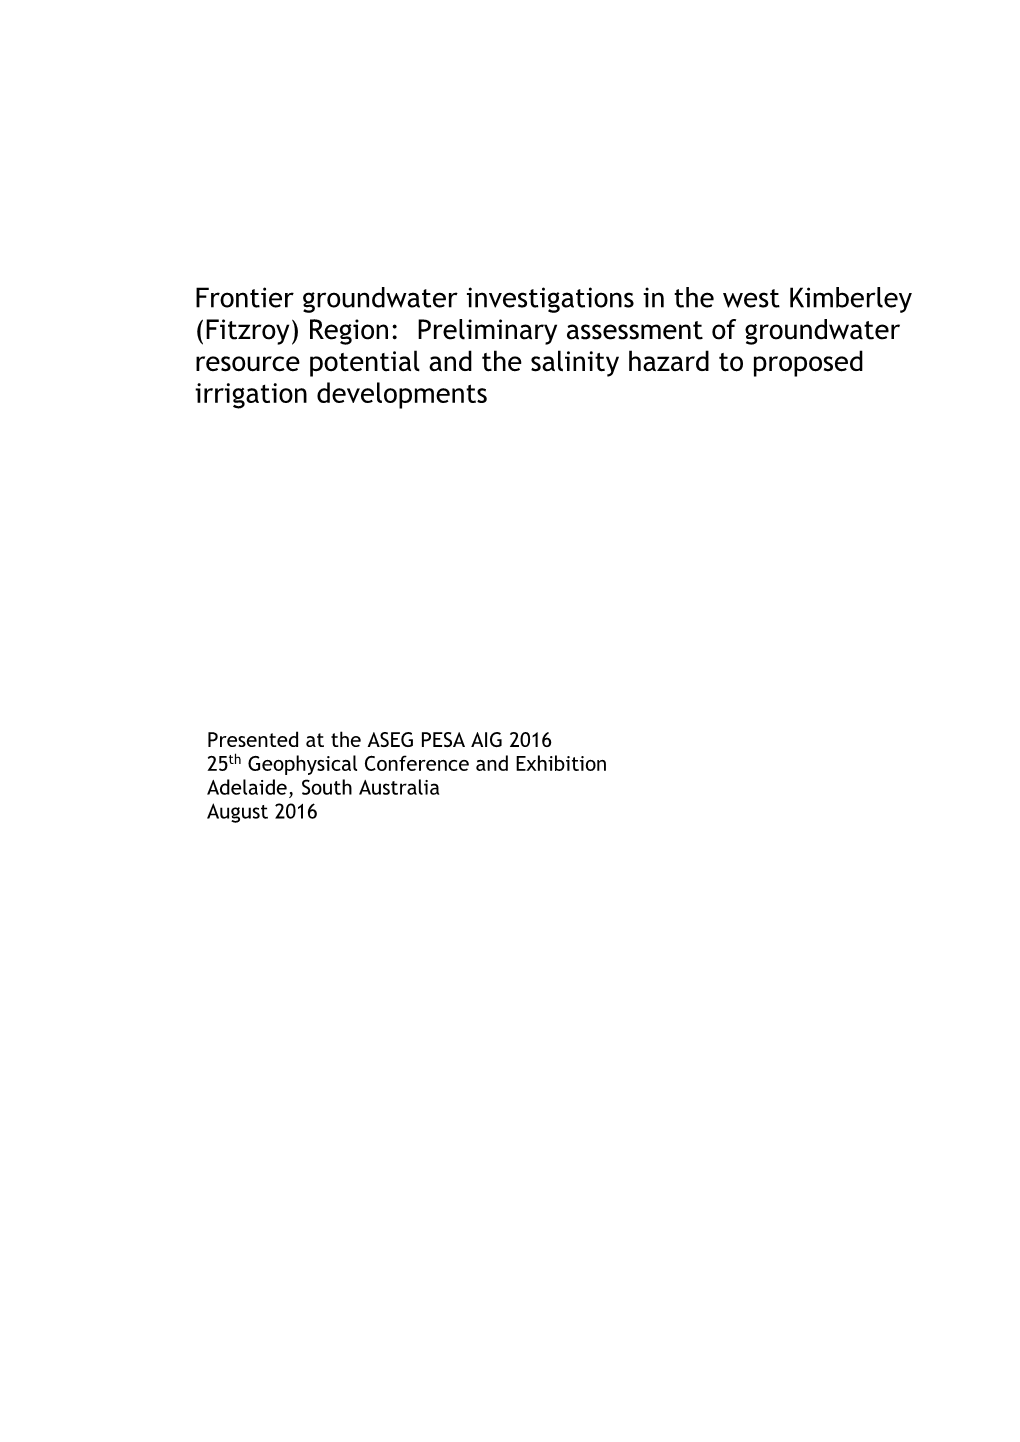 Frontier Groundwater Investigations in the West Kimberley.Pdf